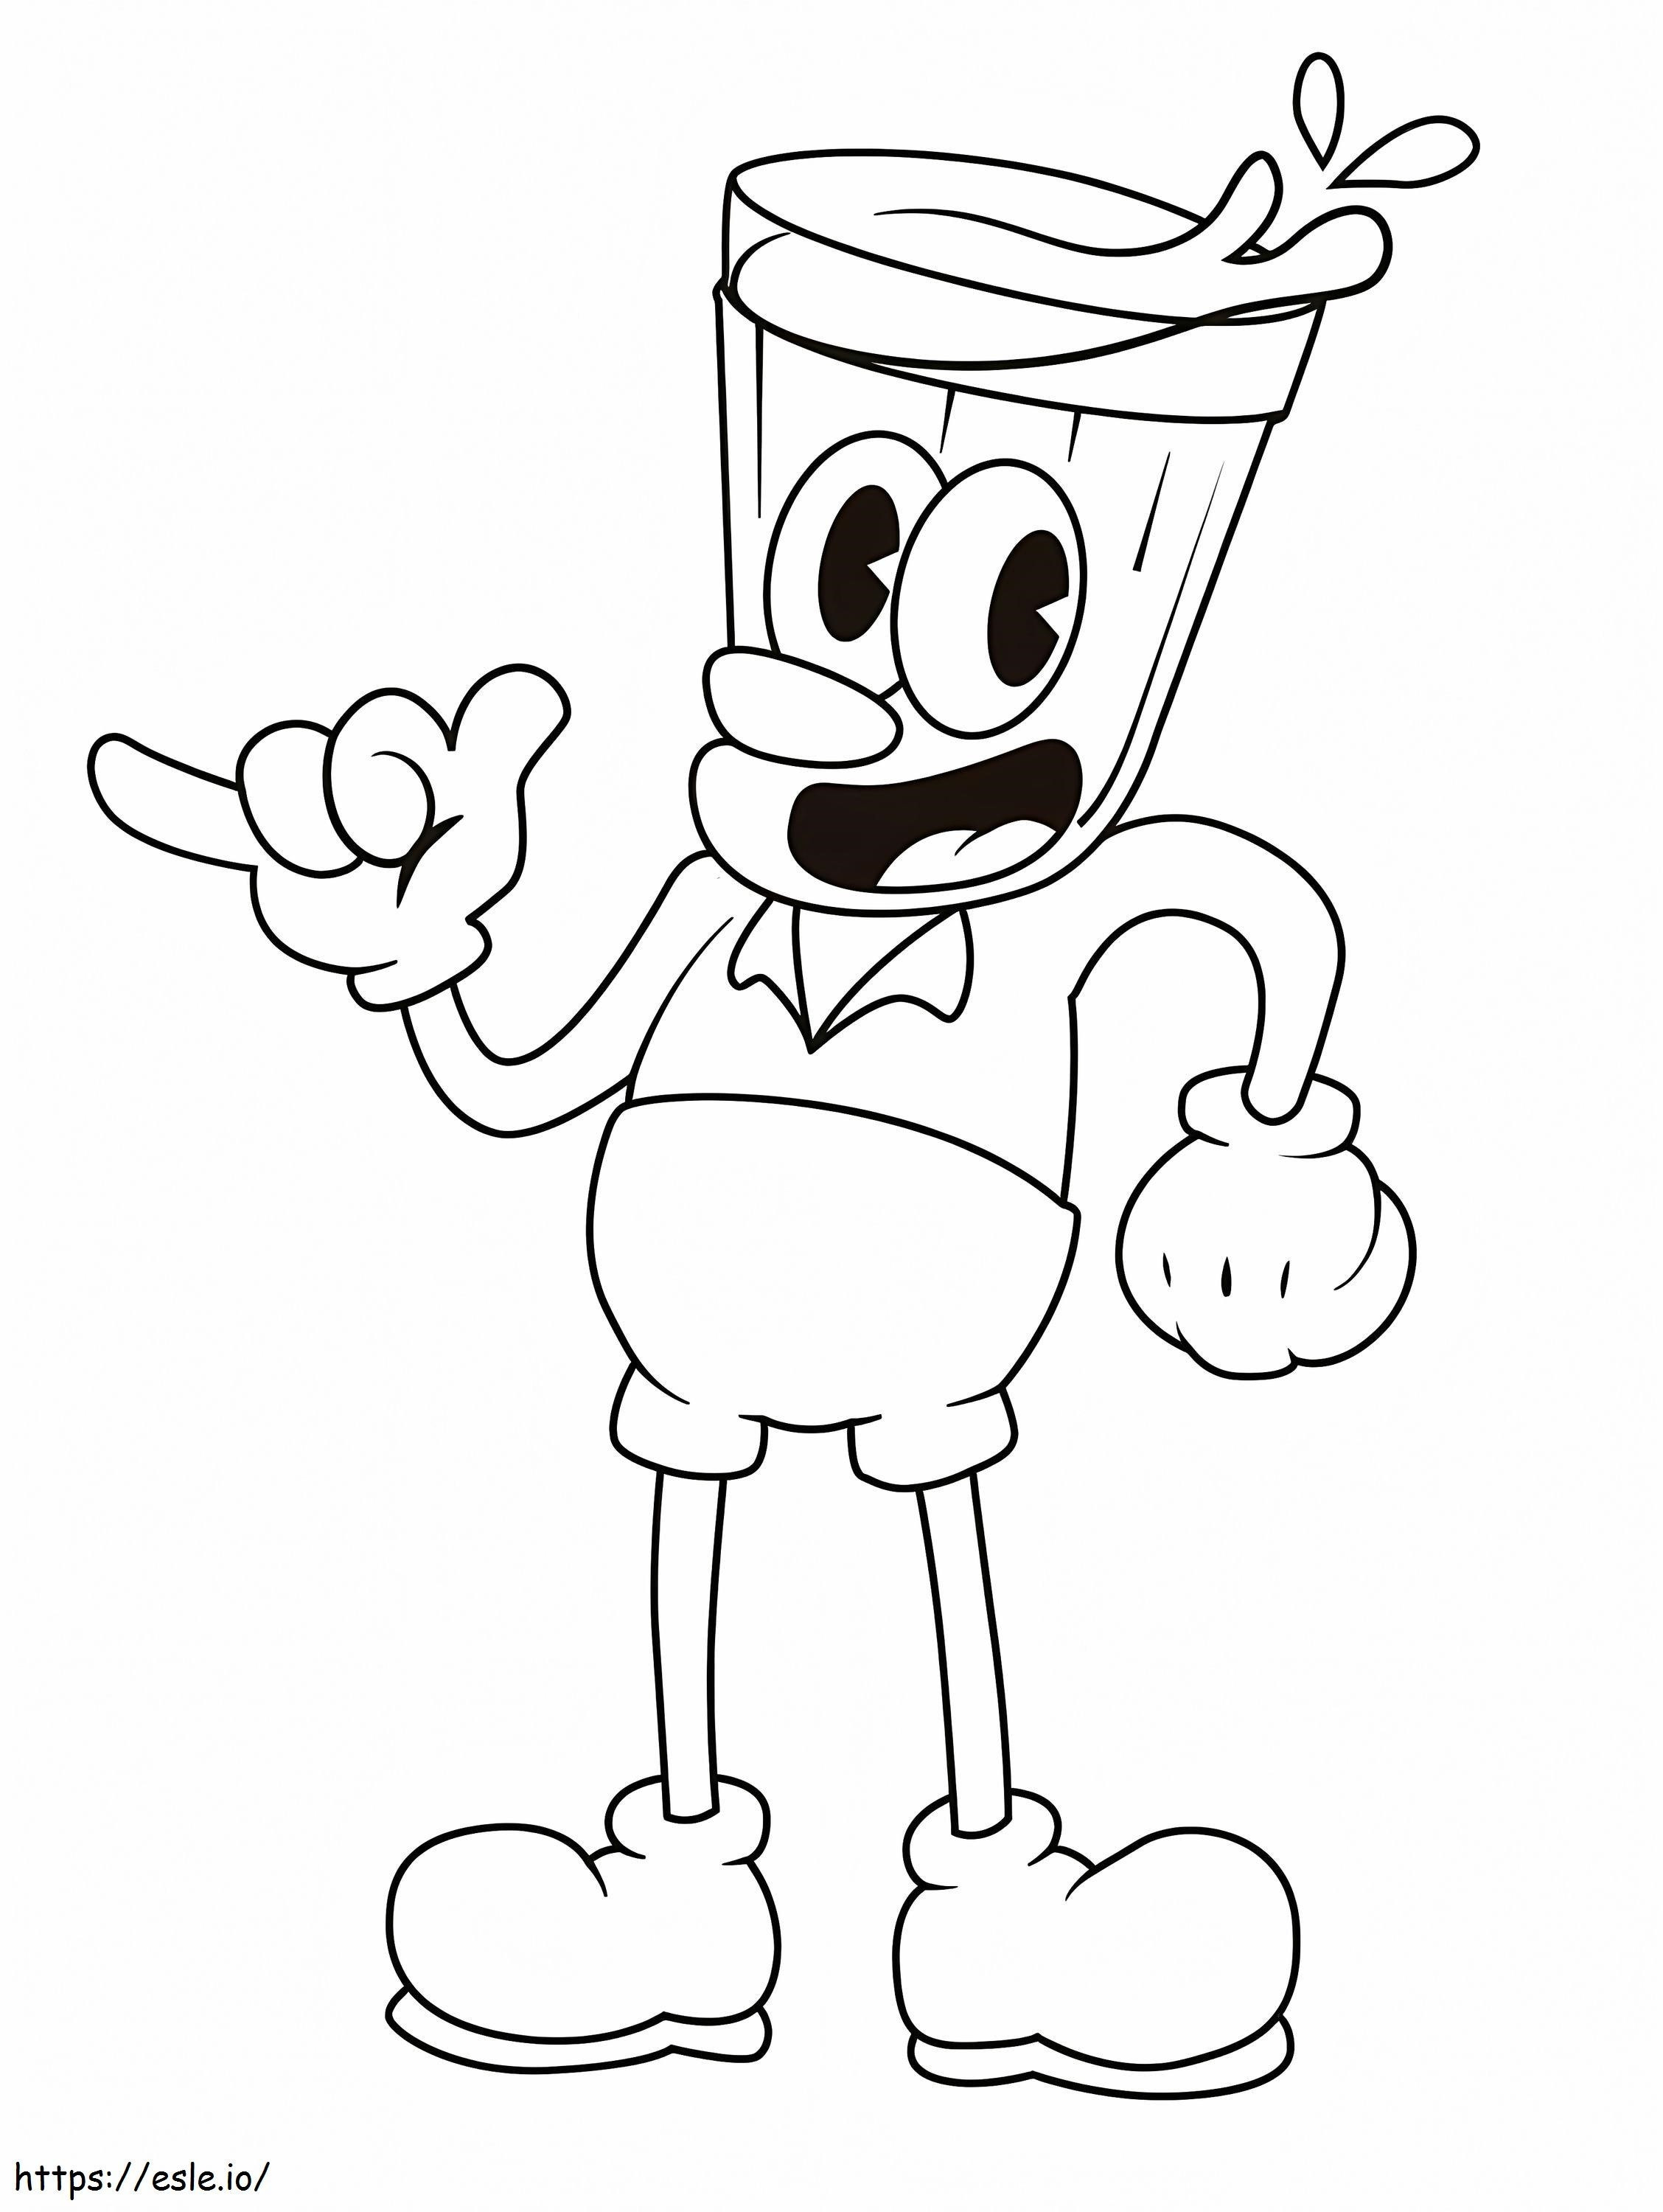 Cuphead 1 coloring page